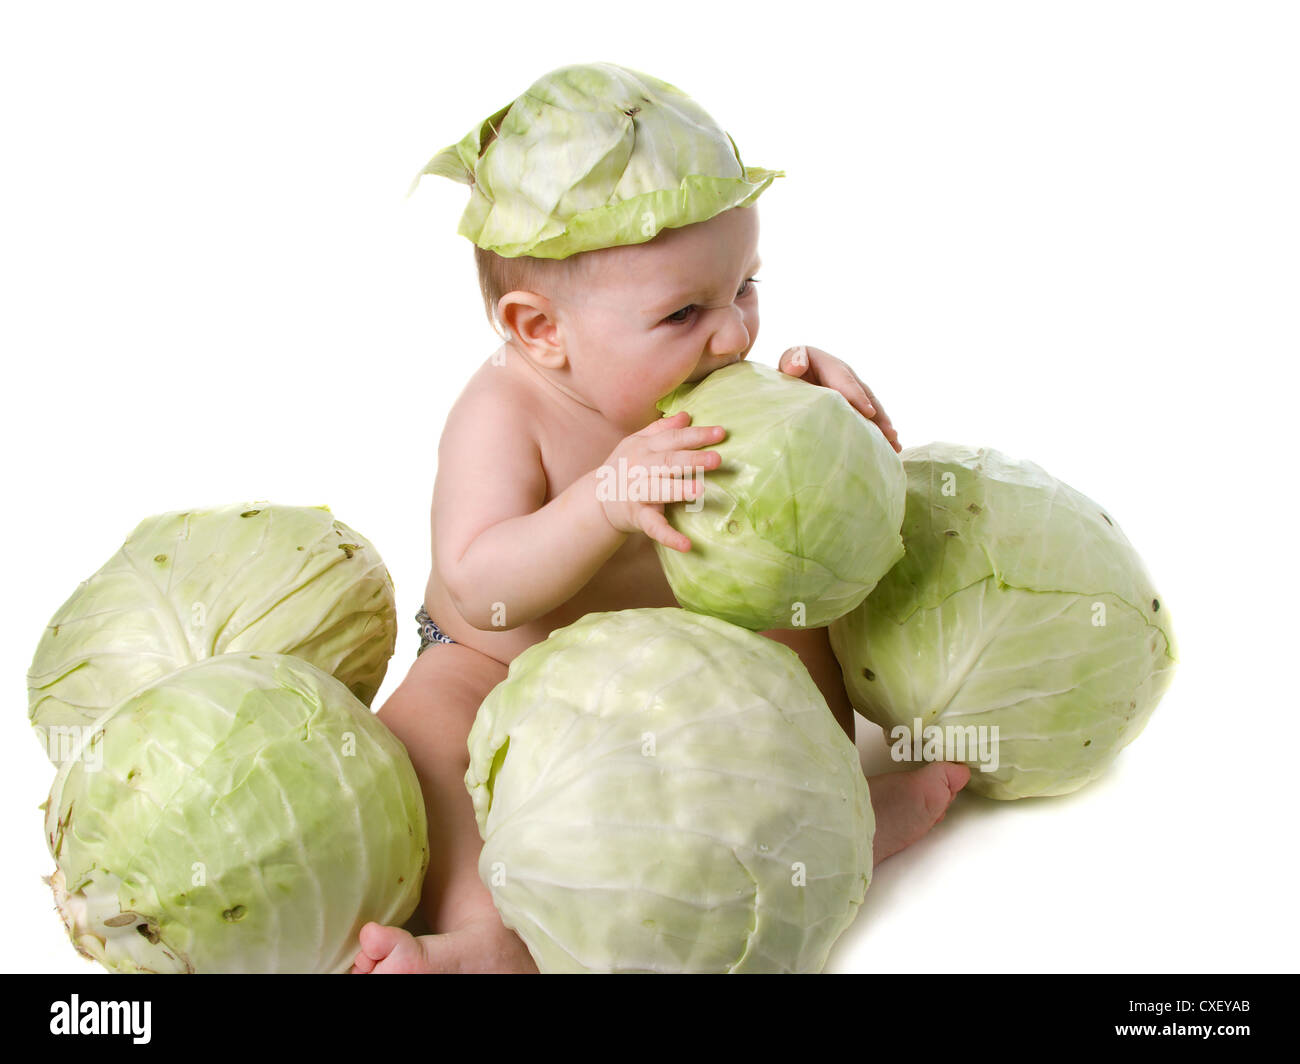 Tot plays with cabbage Stock Photo